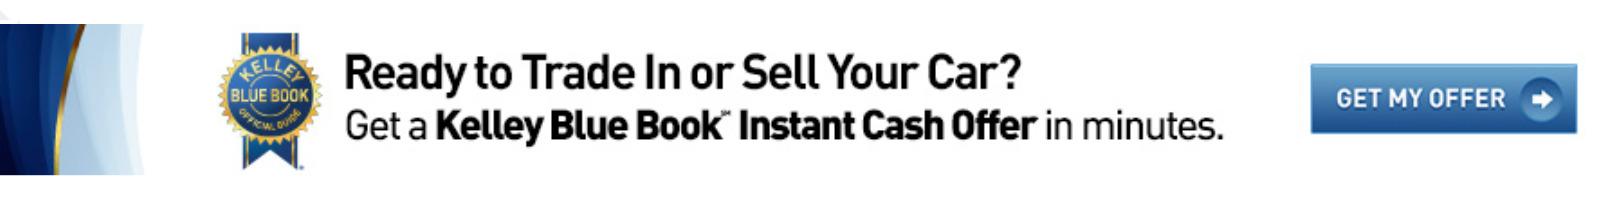 Ready to trade in or sell you car? Get a Kelley Bllue Book Instant Cash Offer in minutes.